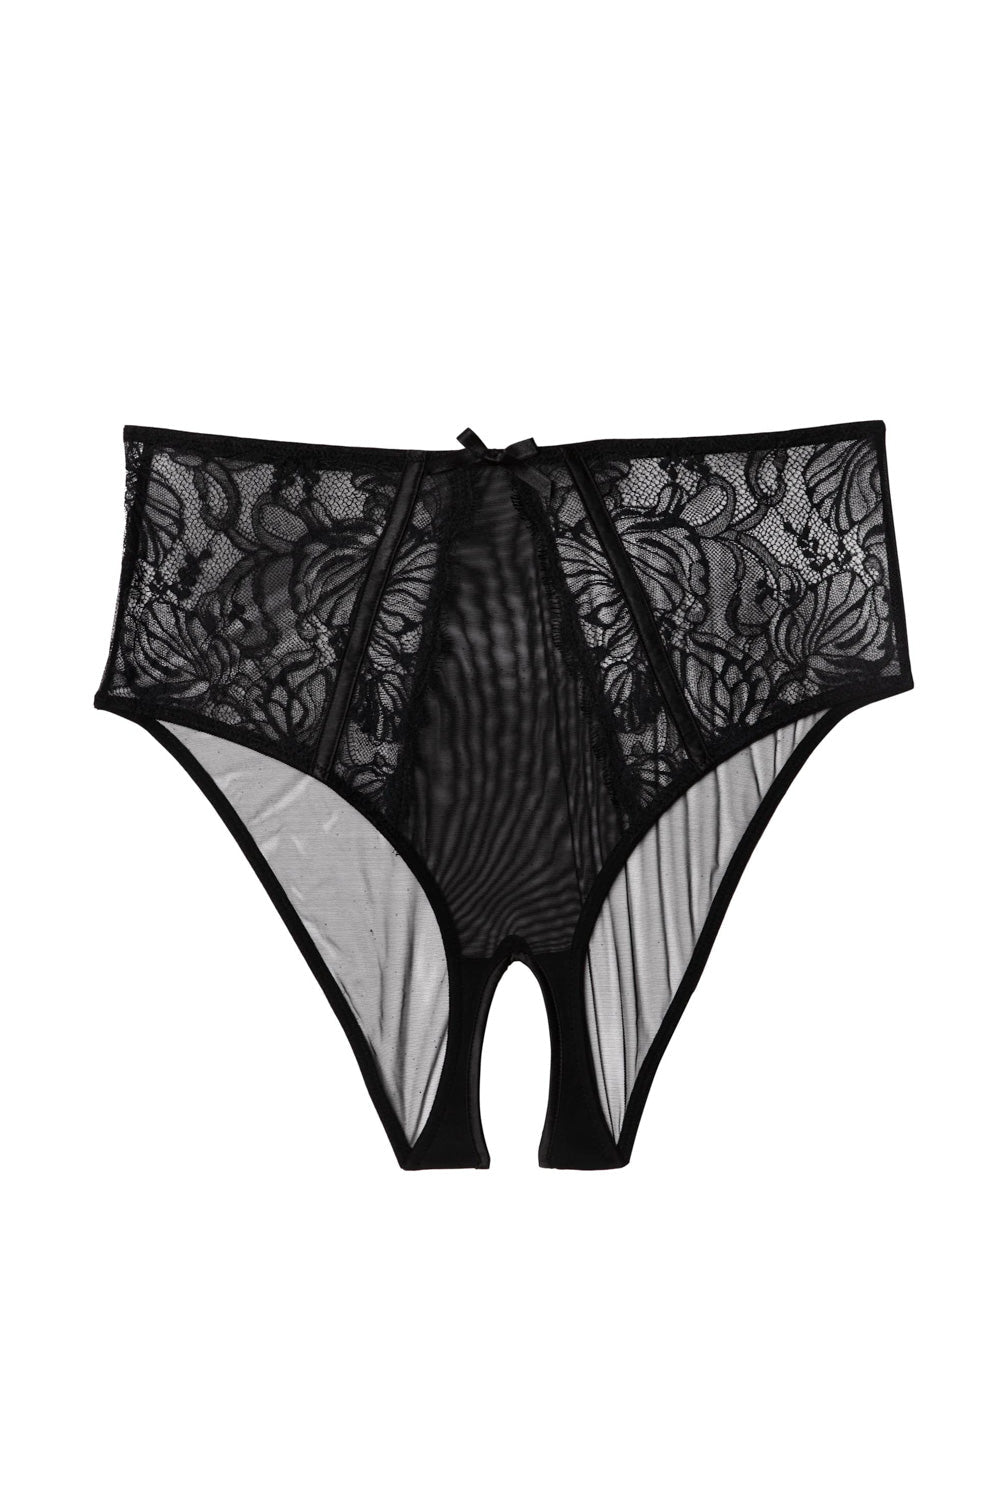 Playful Promises Fallon High Waisted Crotchless Black Brief at the Hosiery  Box Briefs and Pants - The Hosiery Box